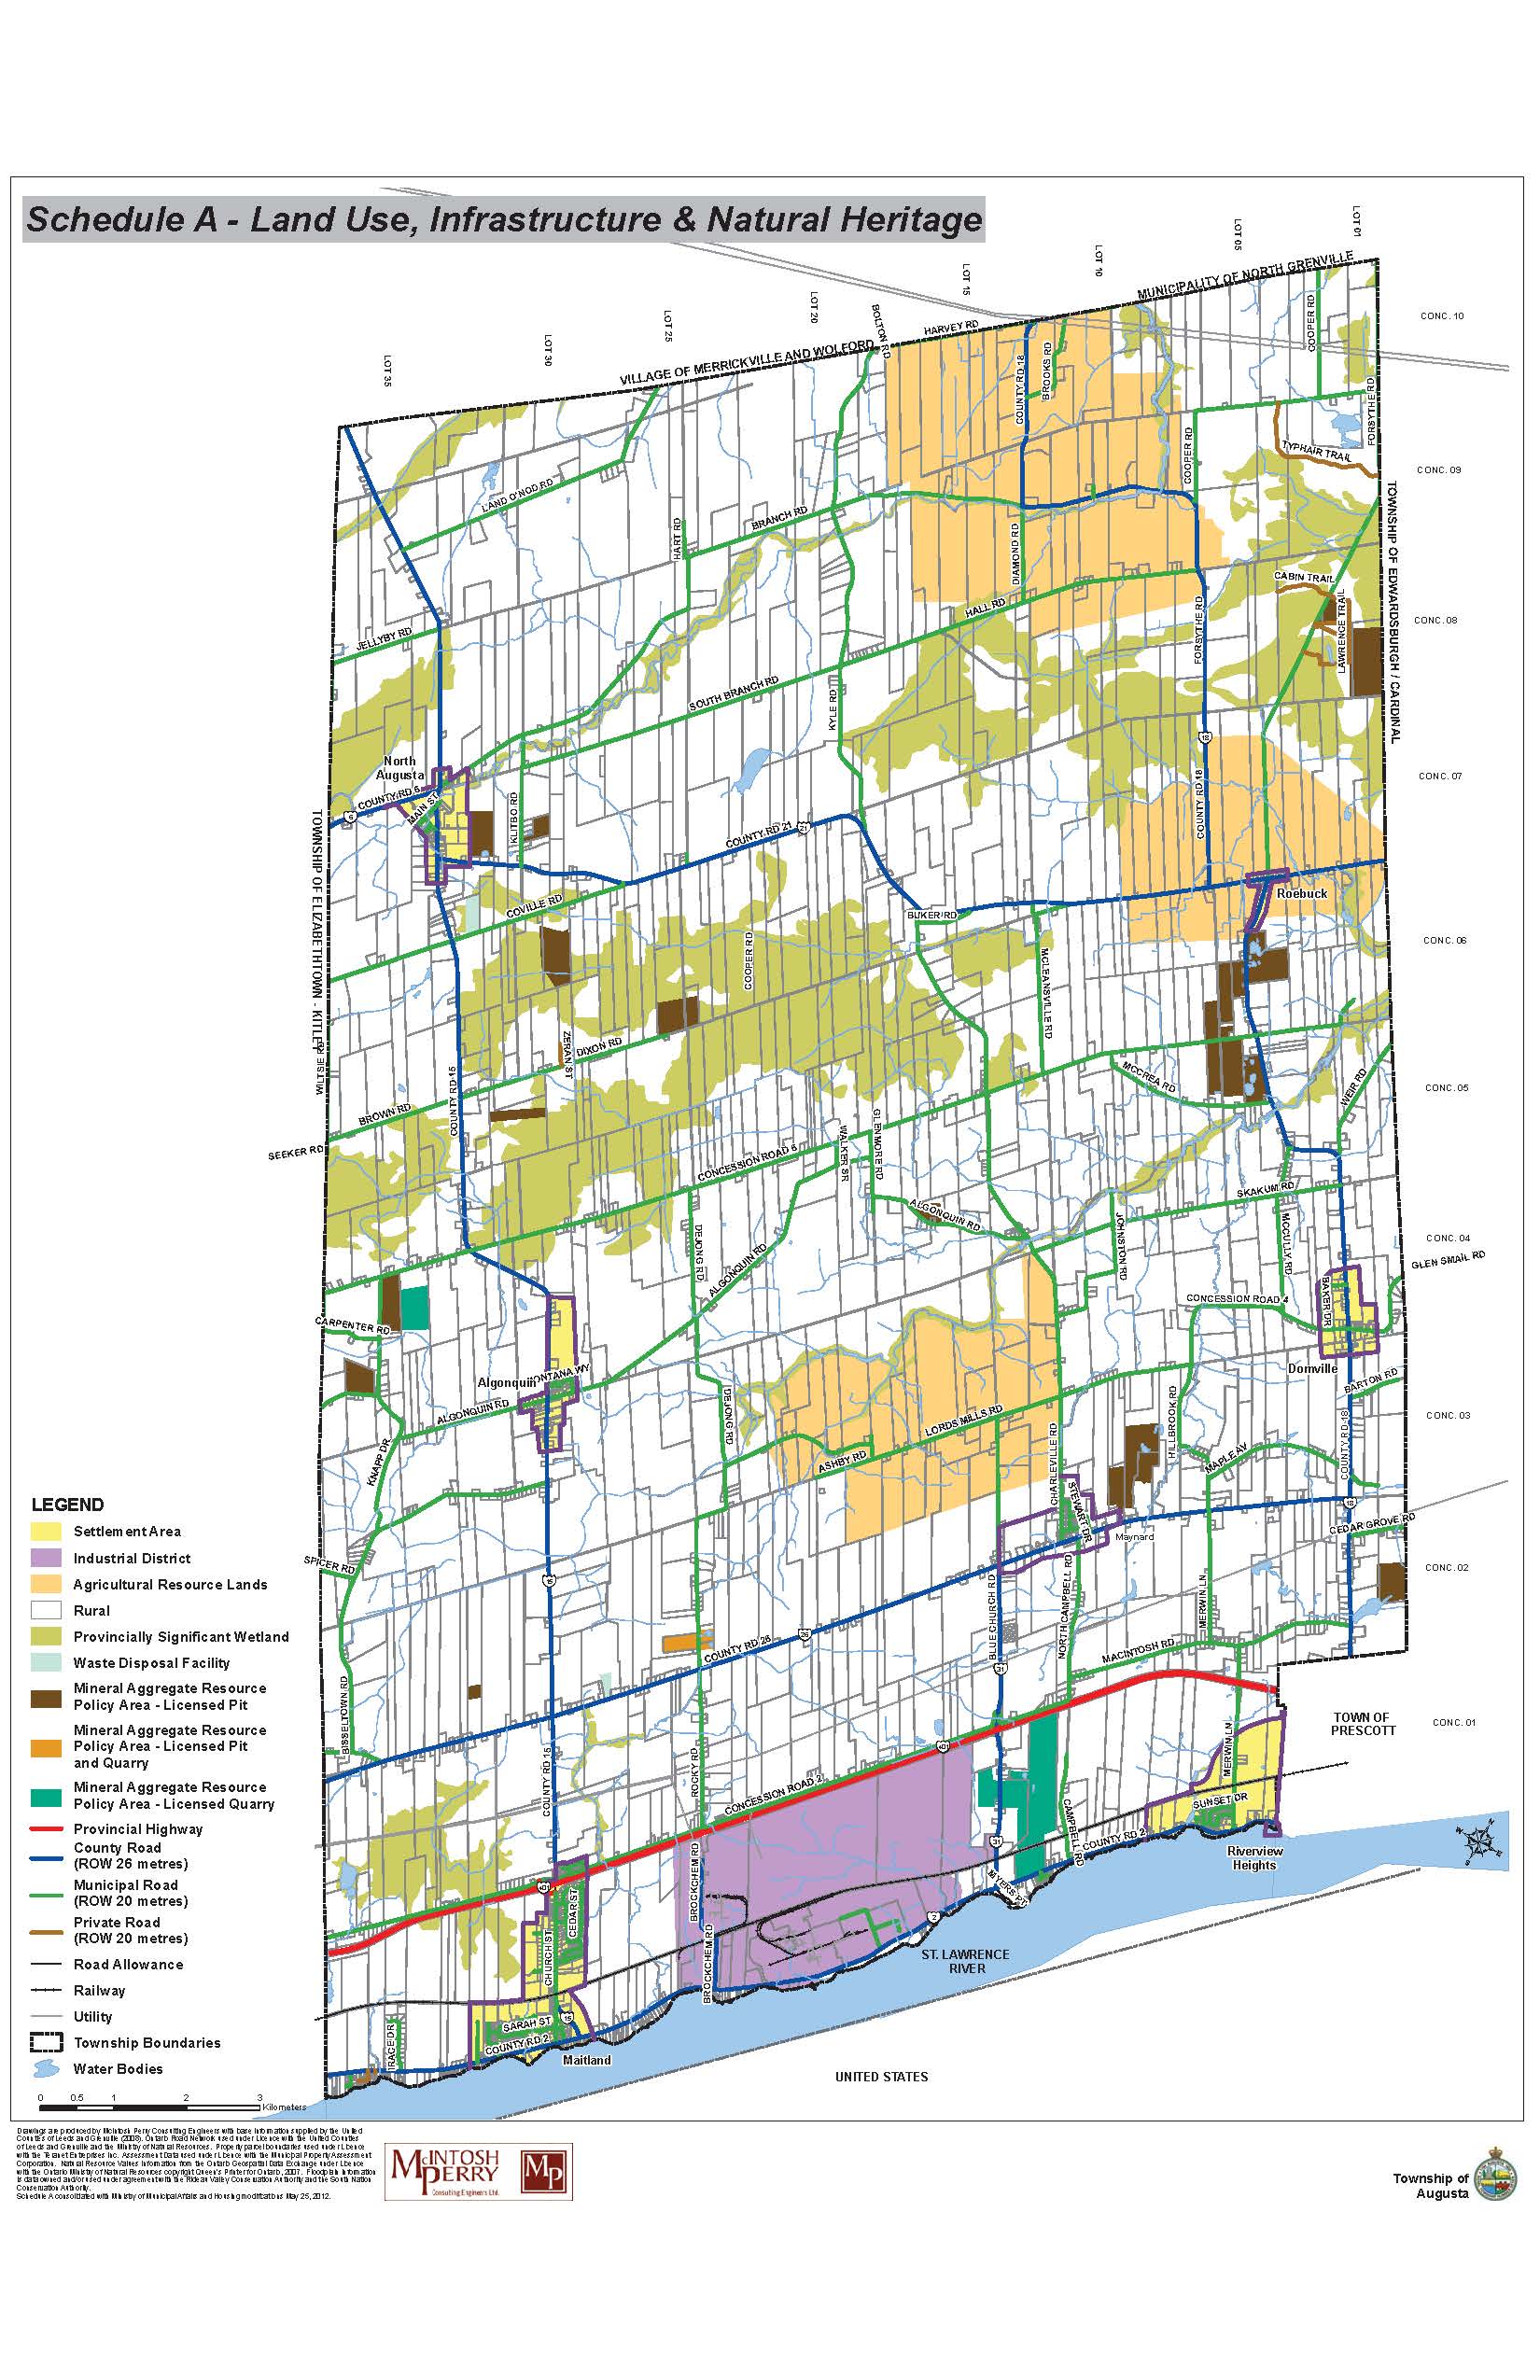 Schedule A - Land Use, Infrastructure & Natural Heritage Map